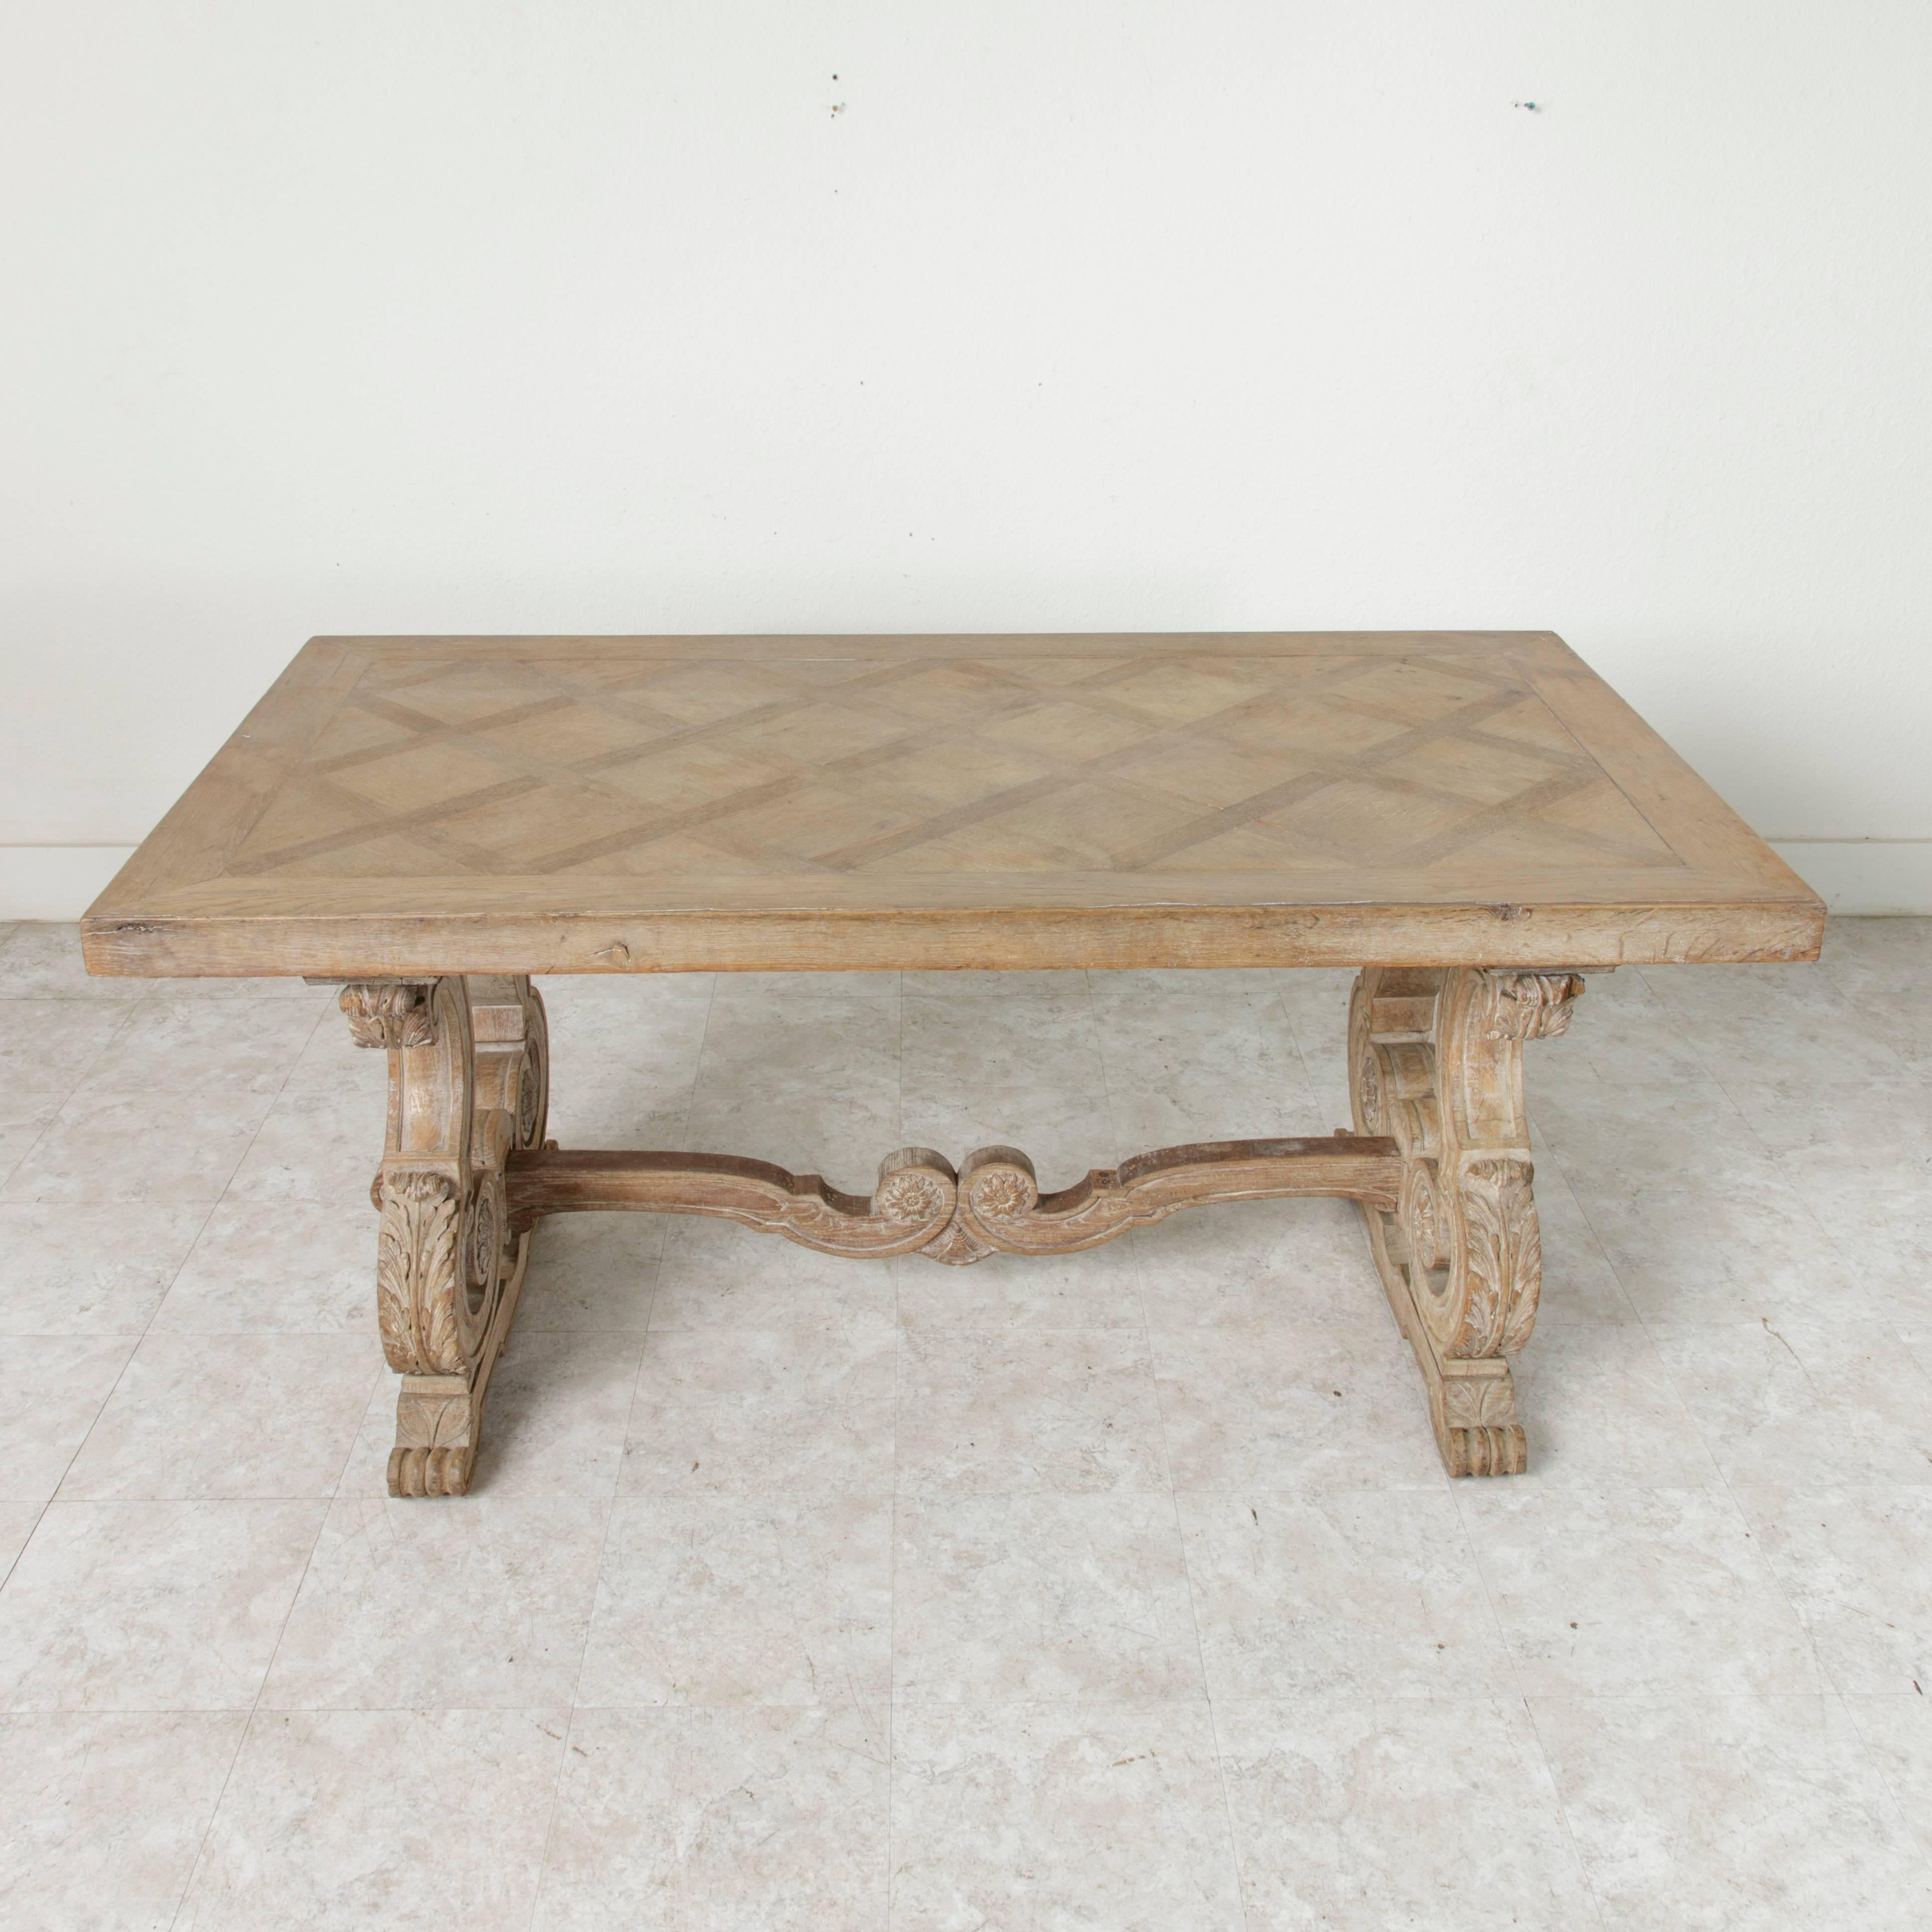 With a natural finish in the Gustavian Style, this oak table features a hand-carved Renaissance style trestle base from circa 1880. Its cerused legs and stretcher are detailed with carved scrolling ending in rosettes as well as acanthus leaves that